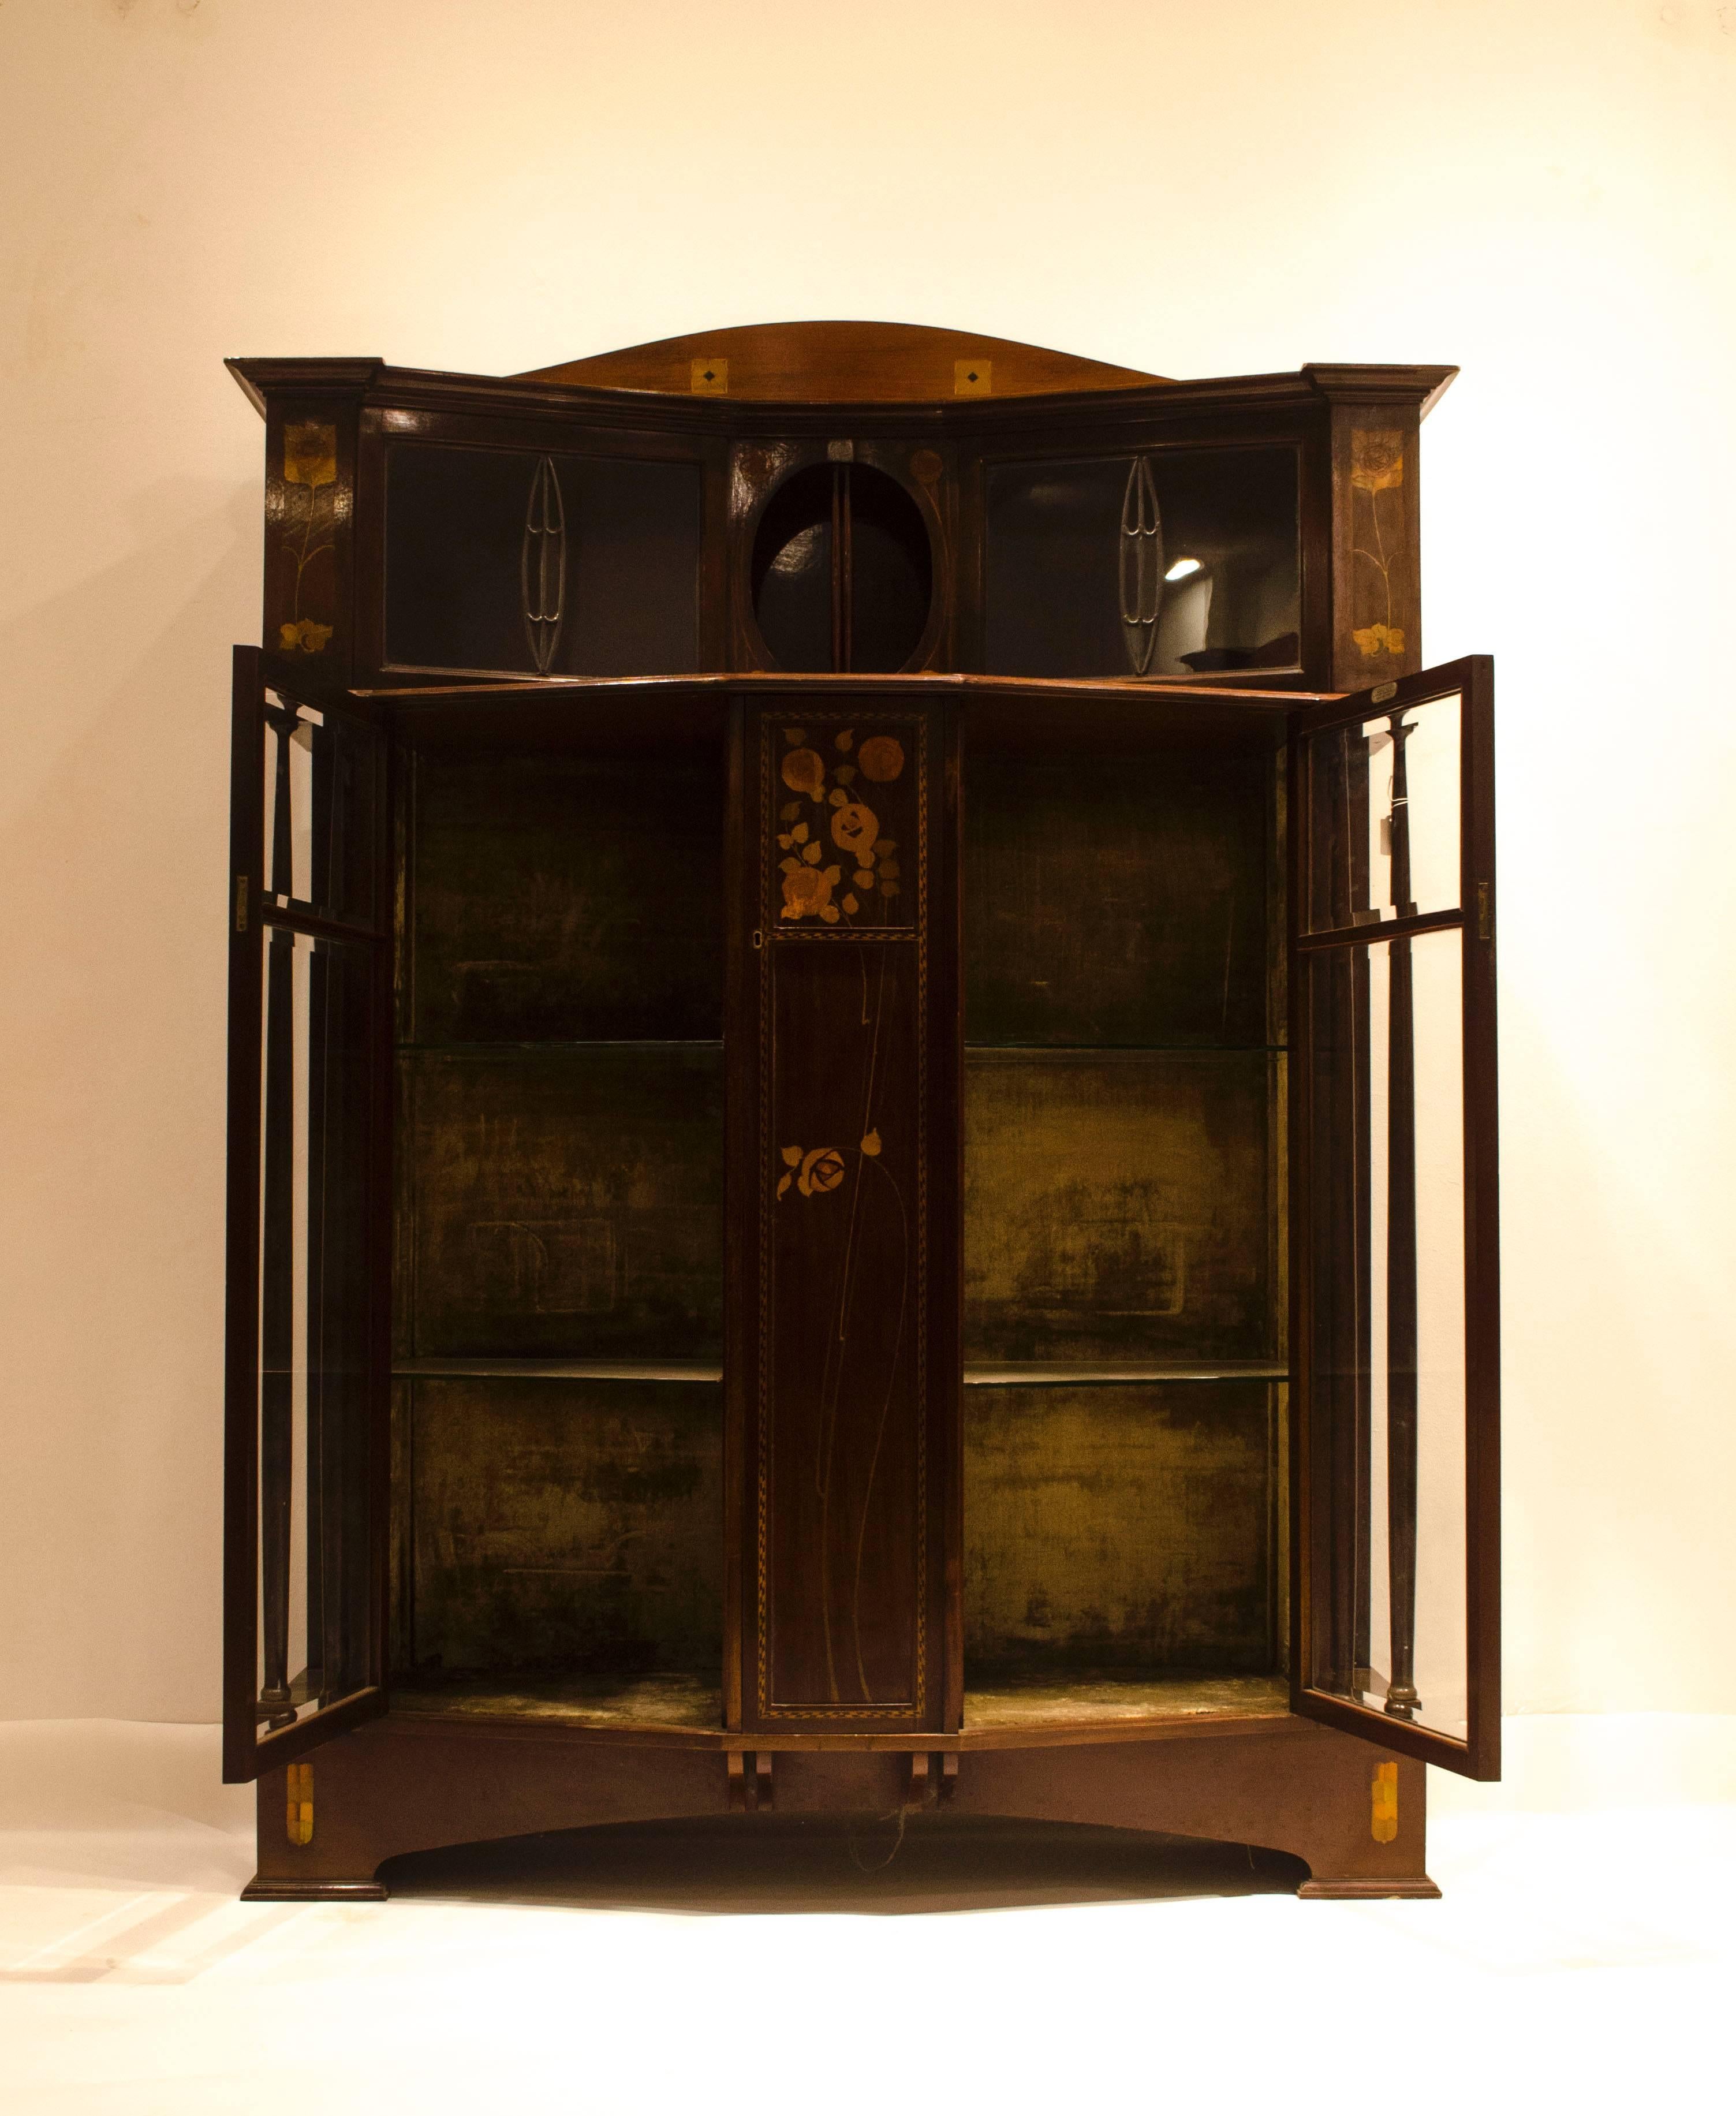 E. Goodall of Manchester, a fruit wood, inlaid, and leaded glass display cabinet with an array of Glasgow Rose and floral fruitwood inlays.
E. Goodall of Manchester were high-class manufacturers of the period who also made furniture for Arthur